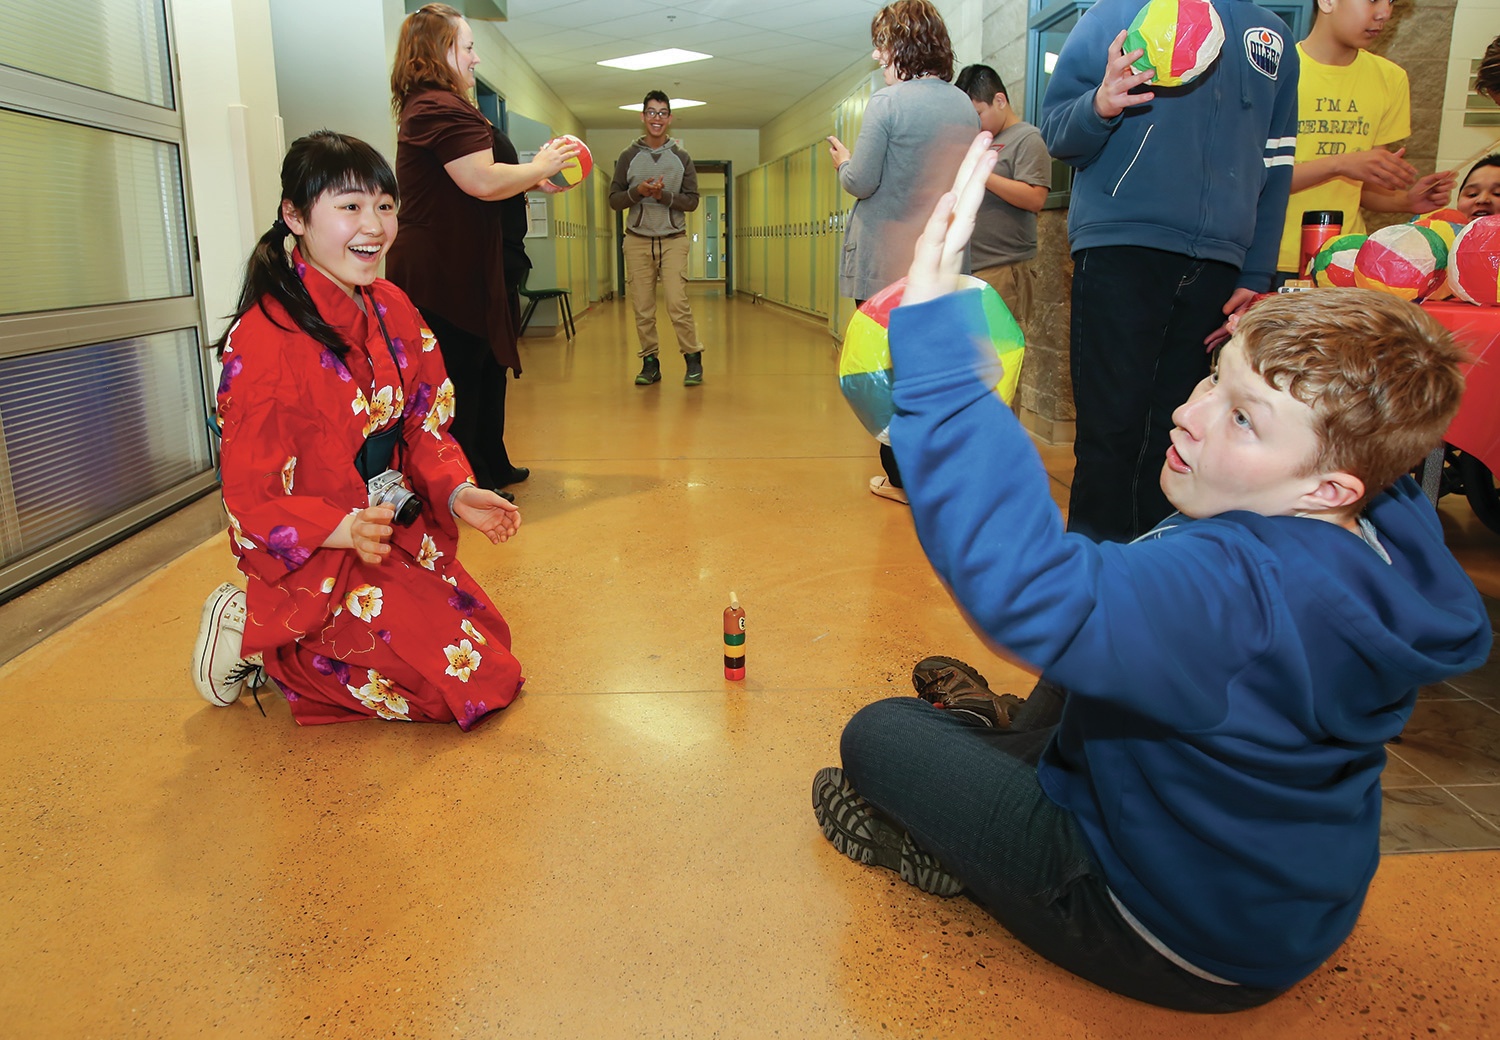 CULTURAL SHARING - Students from Nagasaki Junshin Junior High School in Japan demonstrated a number of traditional Japanese toys and games to students at St. Francis of Assisi Middle School during a visit to the City last week.